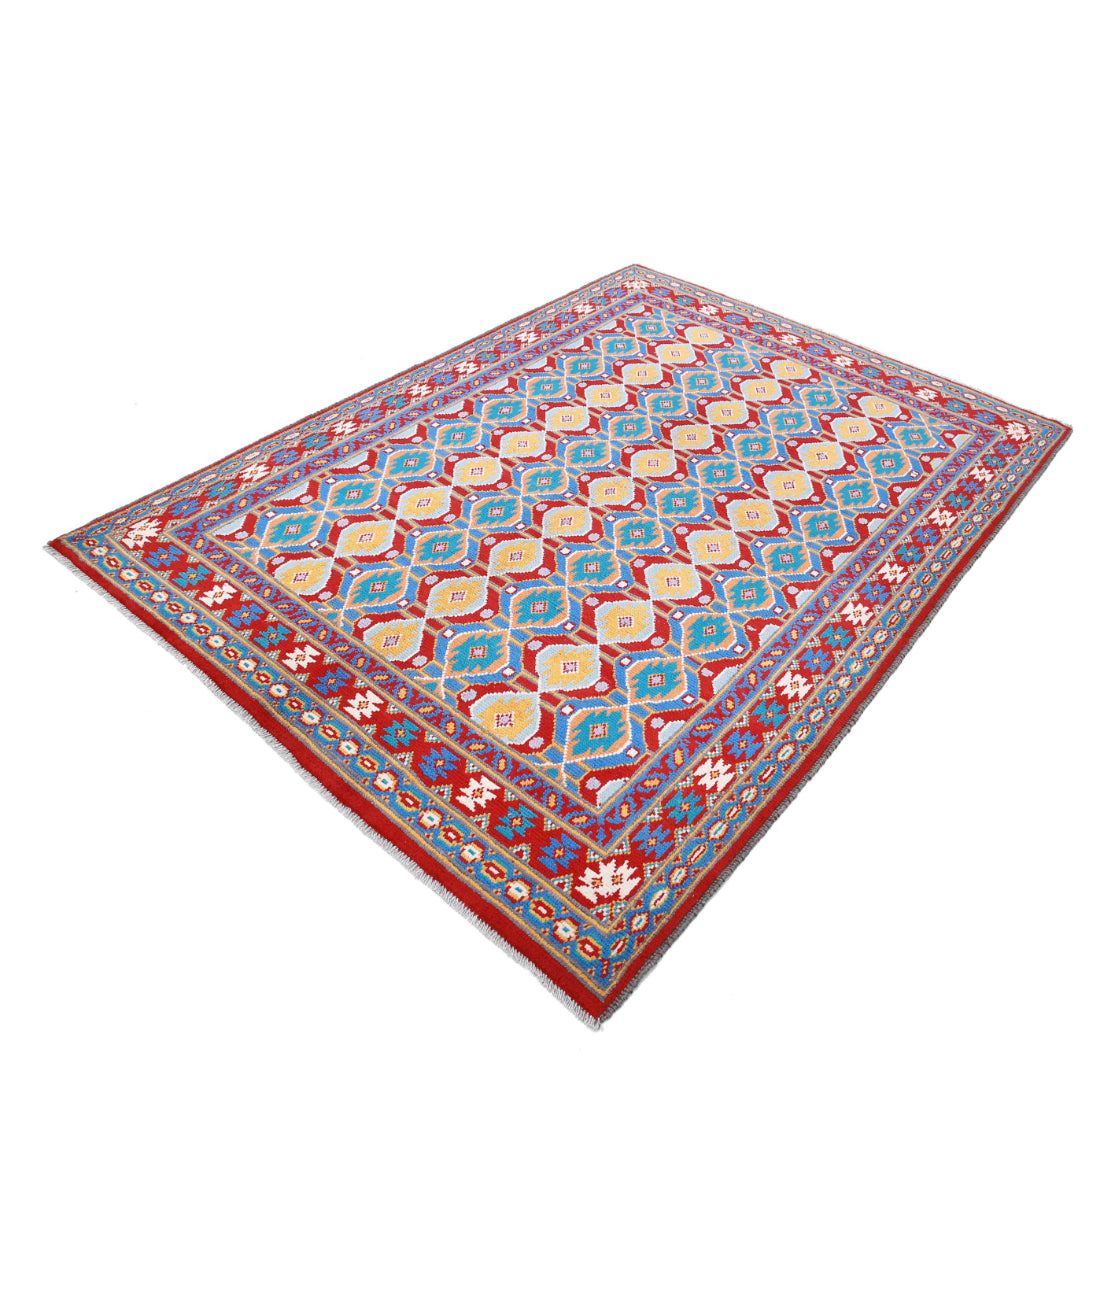 Revival 5'8'' X 7'9'' Hand-Knotted Wool Rug 5'8'' x 7'9'' (170 X 233) / Red / Multi